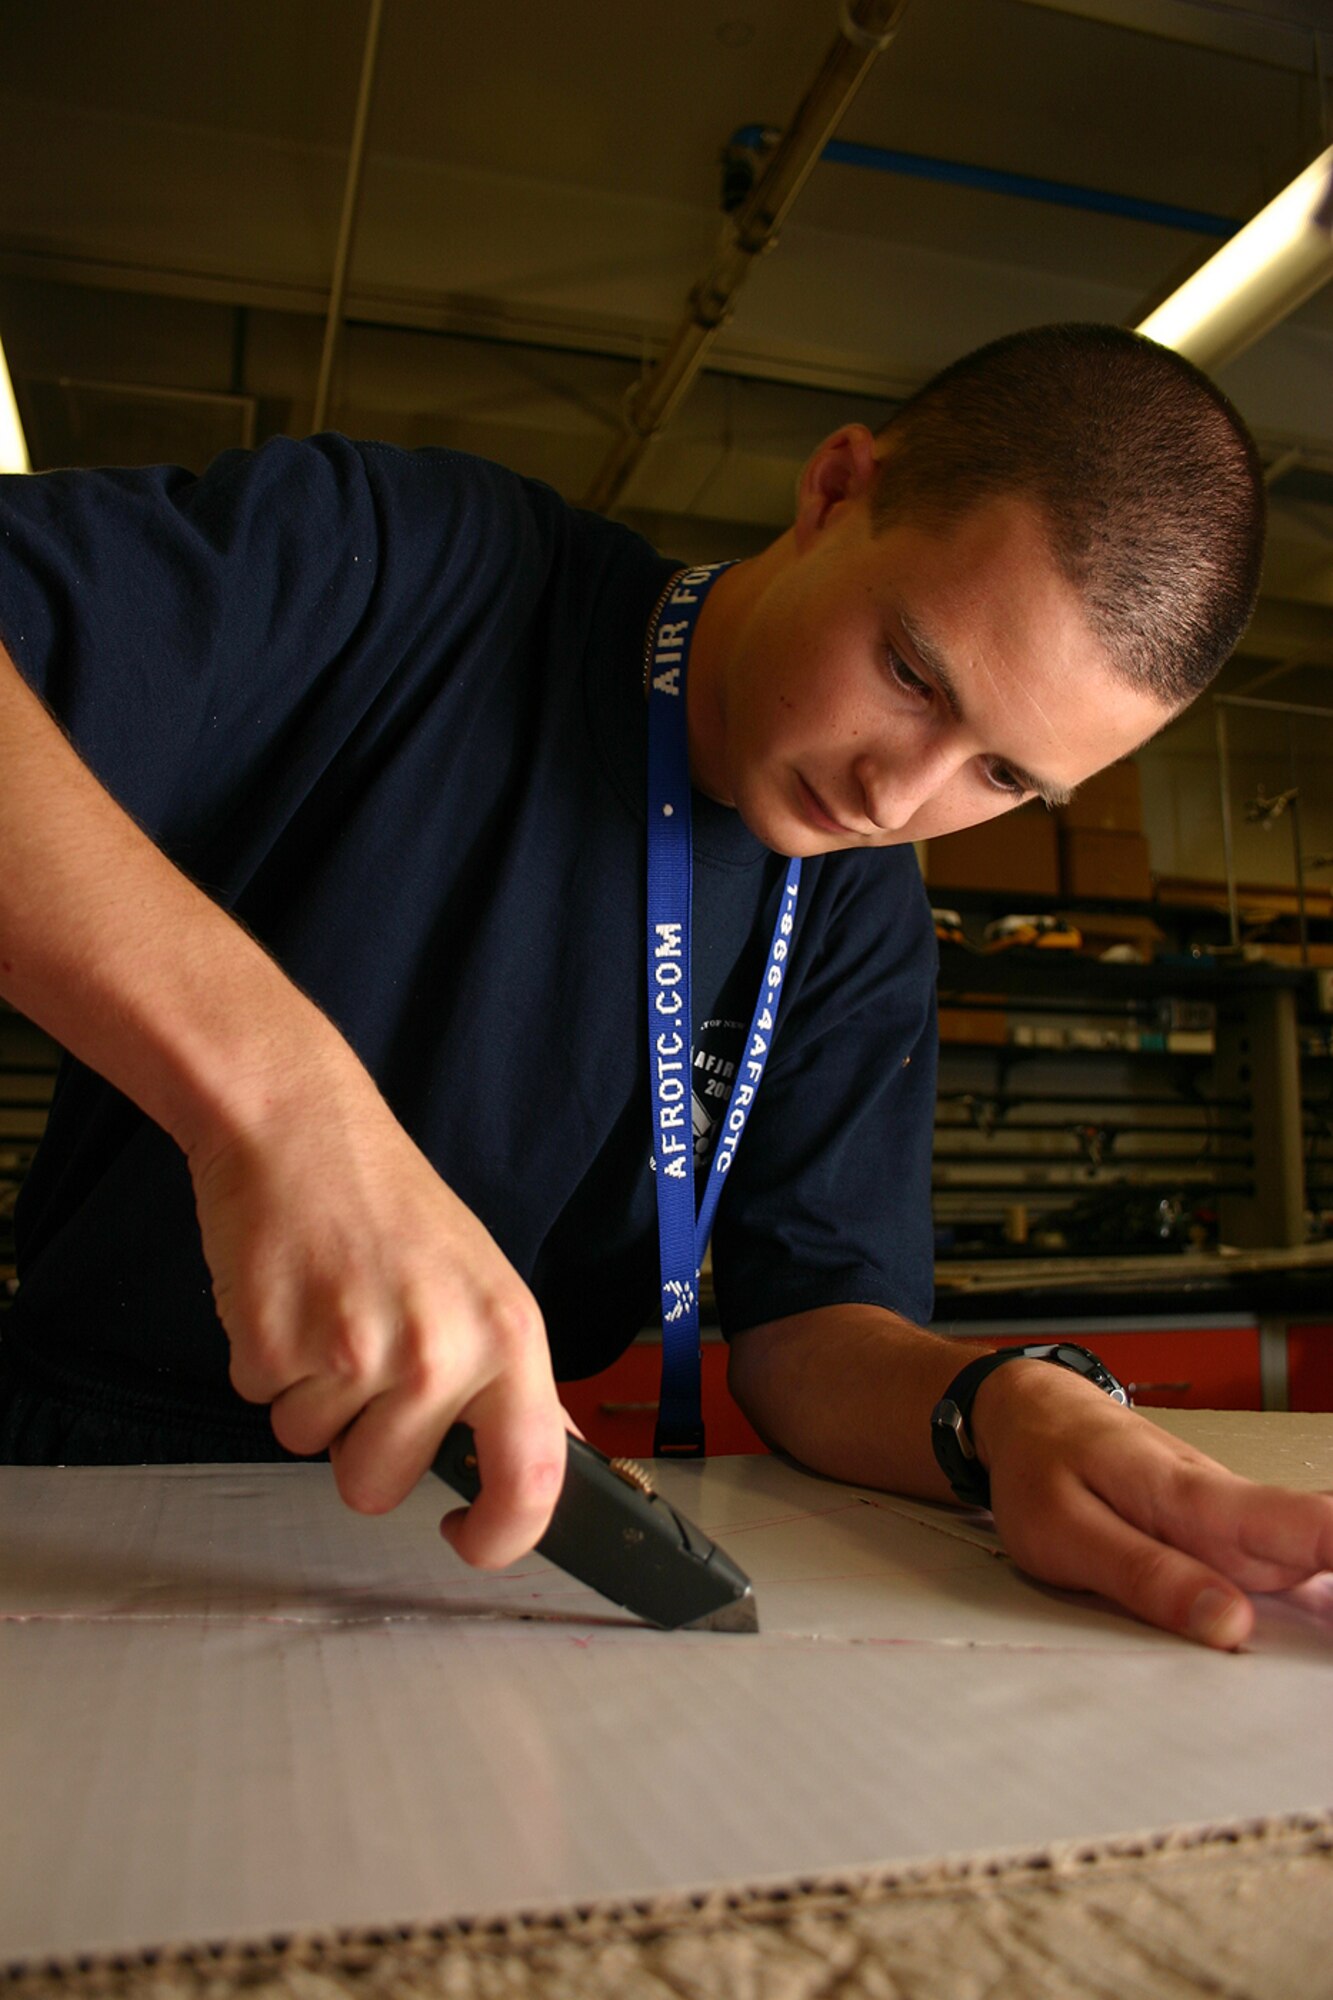 Air Force Junior ROTC Cadet Thomas Murphy from California carves out the frame of his team's rocket car July 29 during the 2008 Air Force Junior ROTC Aerospace and Technology Honor Camp rocket car contest at Albuquerque, N.M.  More than 450 cadets from Junior ROTC units worldwide participated in a total of eight camps with 54 students each - half at Albuquerque and half at Norman, Okla., and Tinker AFB. (U.S. Air Force photo/Staff Sgt. Jason Lake)